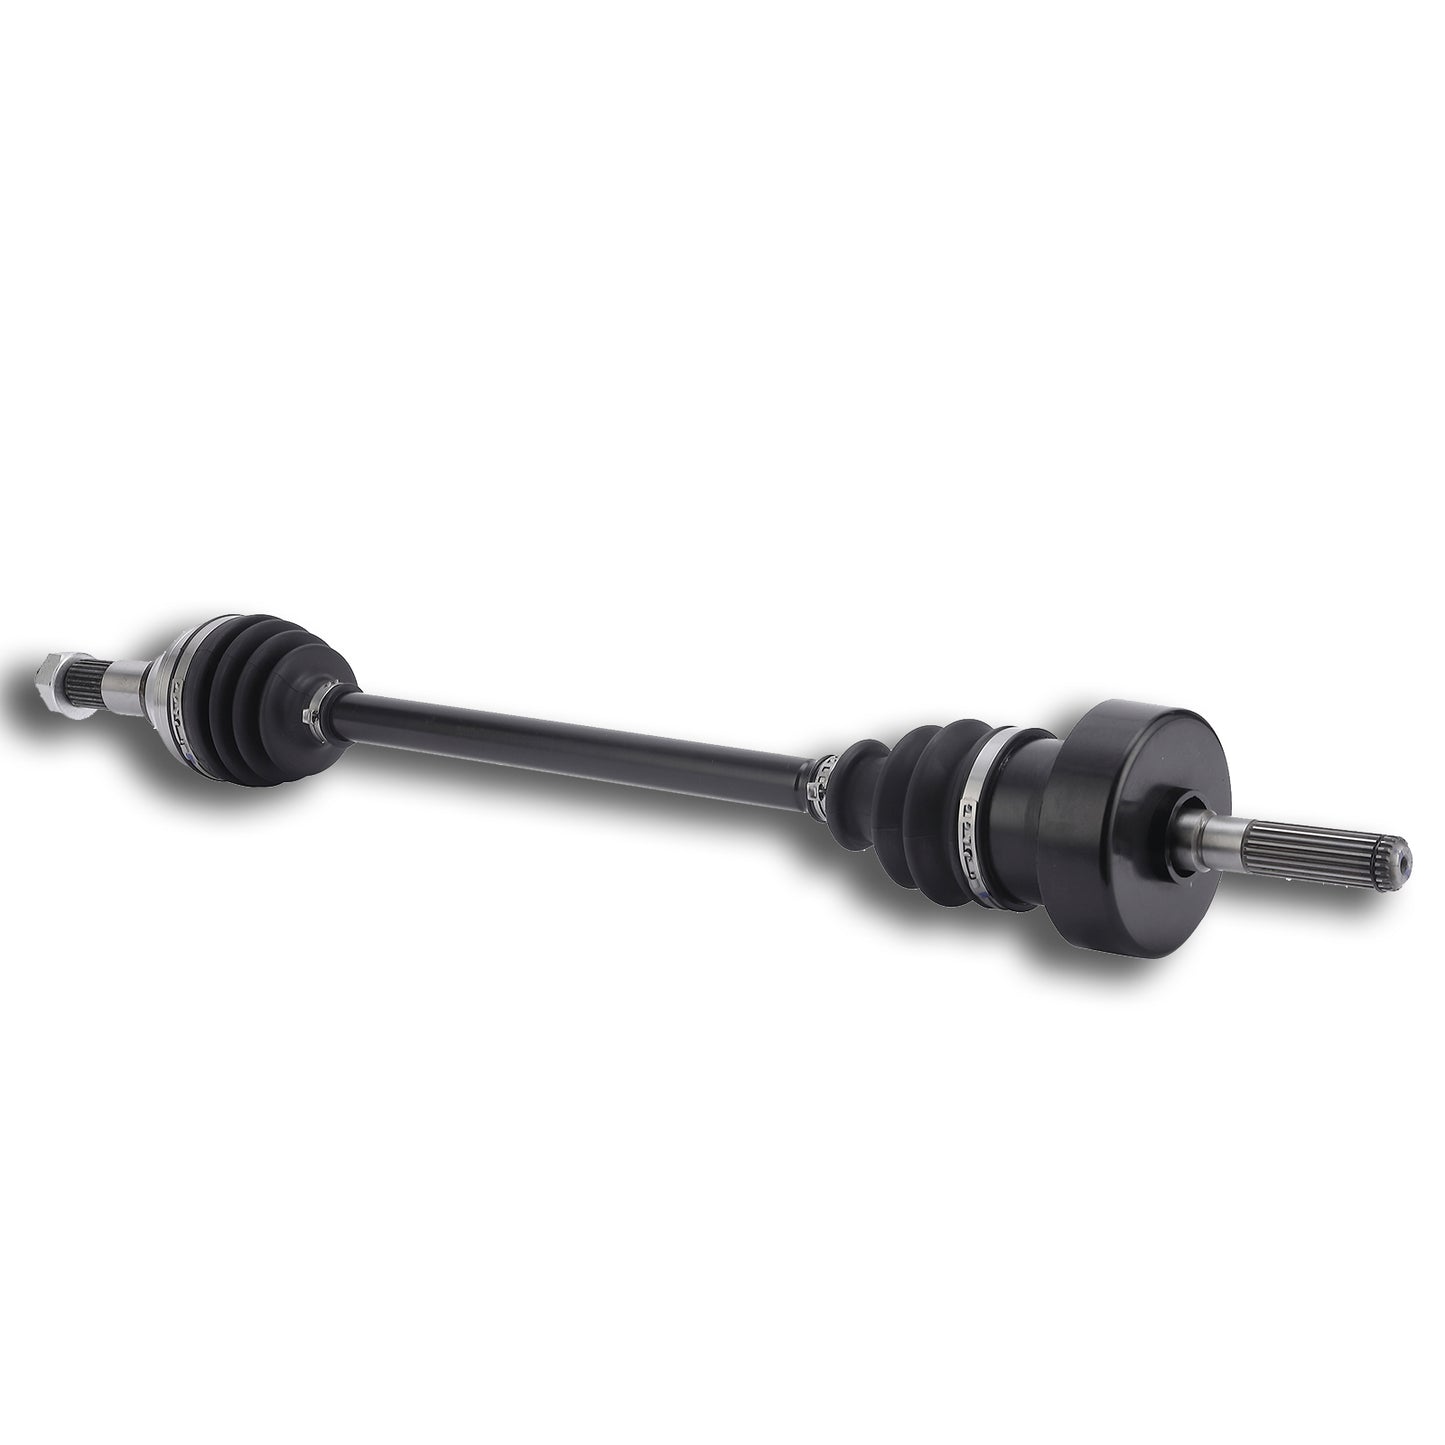 1 CAM-CA119 and 1 CAM-CA-219 Front Left Drive Shaft CV Axle Compatible with CAN AM 2014 2015 2016 Maverick 1000 XMR LF 705401387,705401663,705401807,705401877